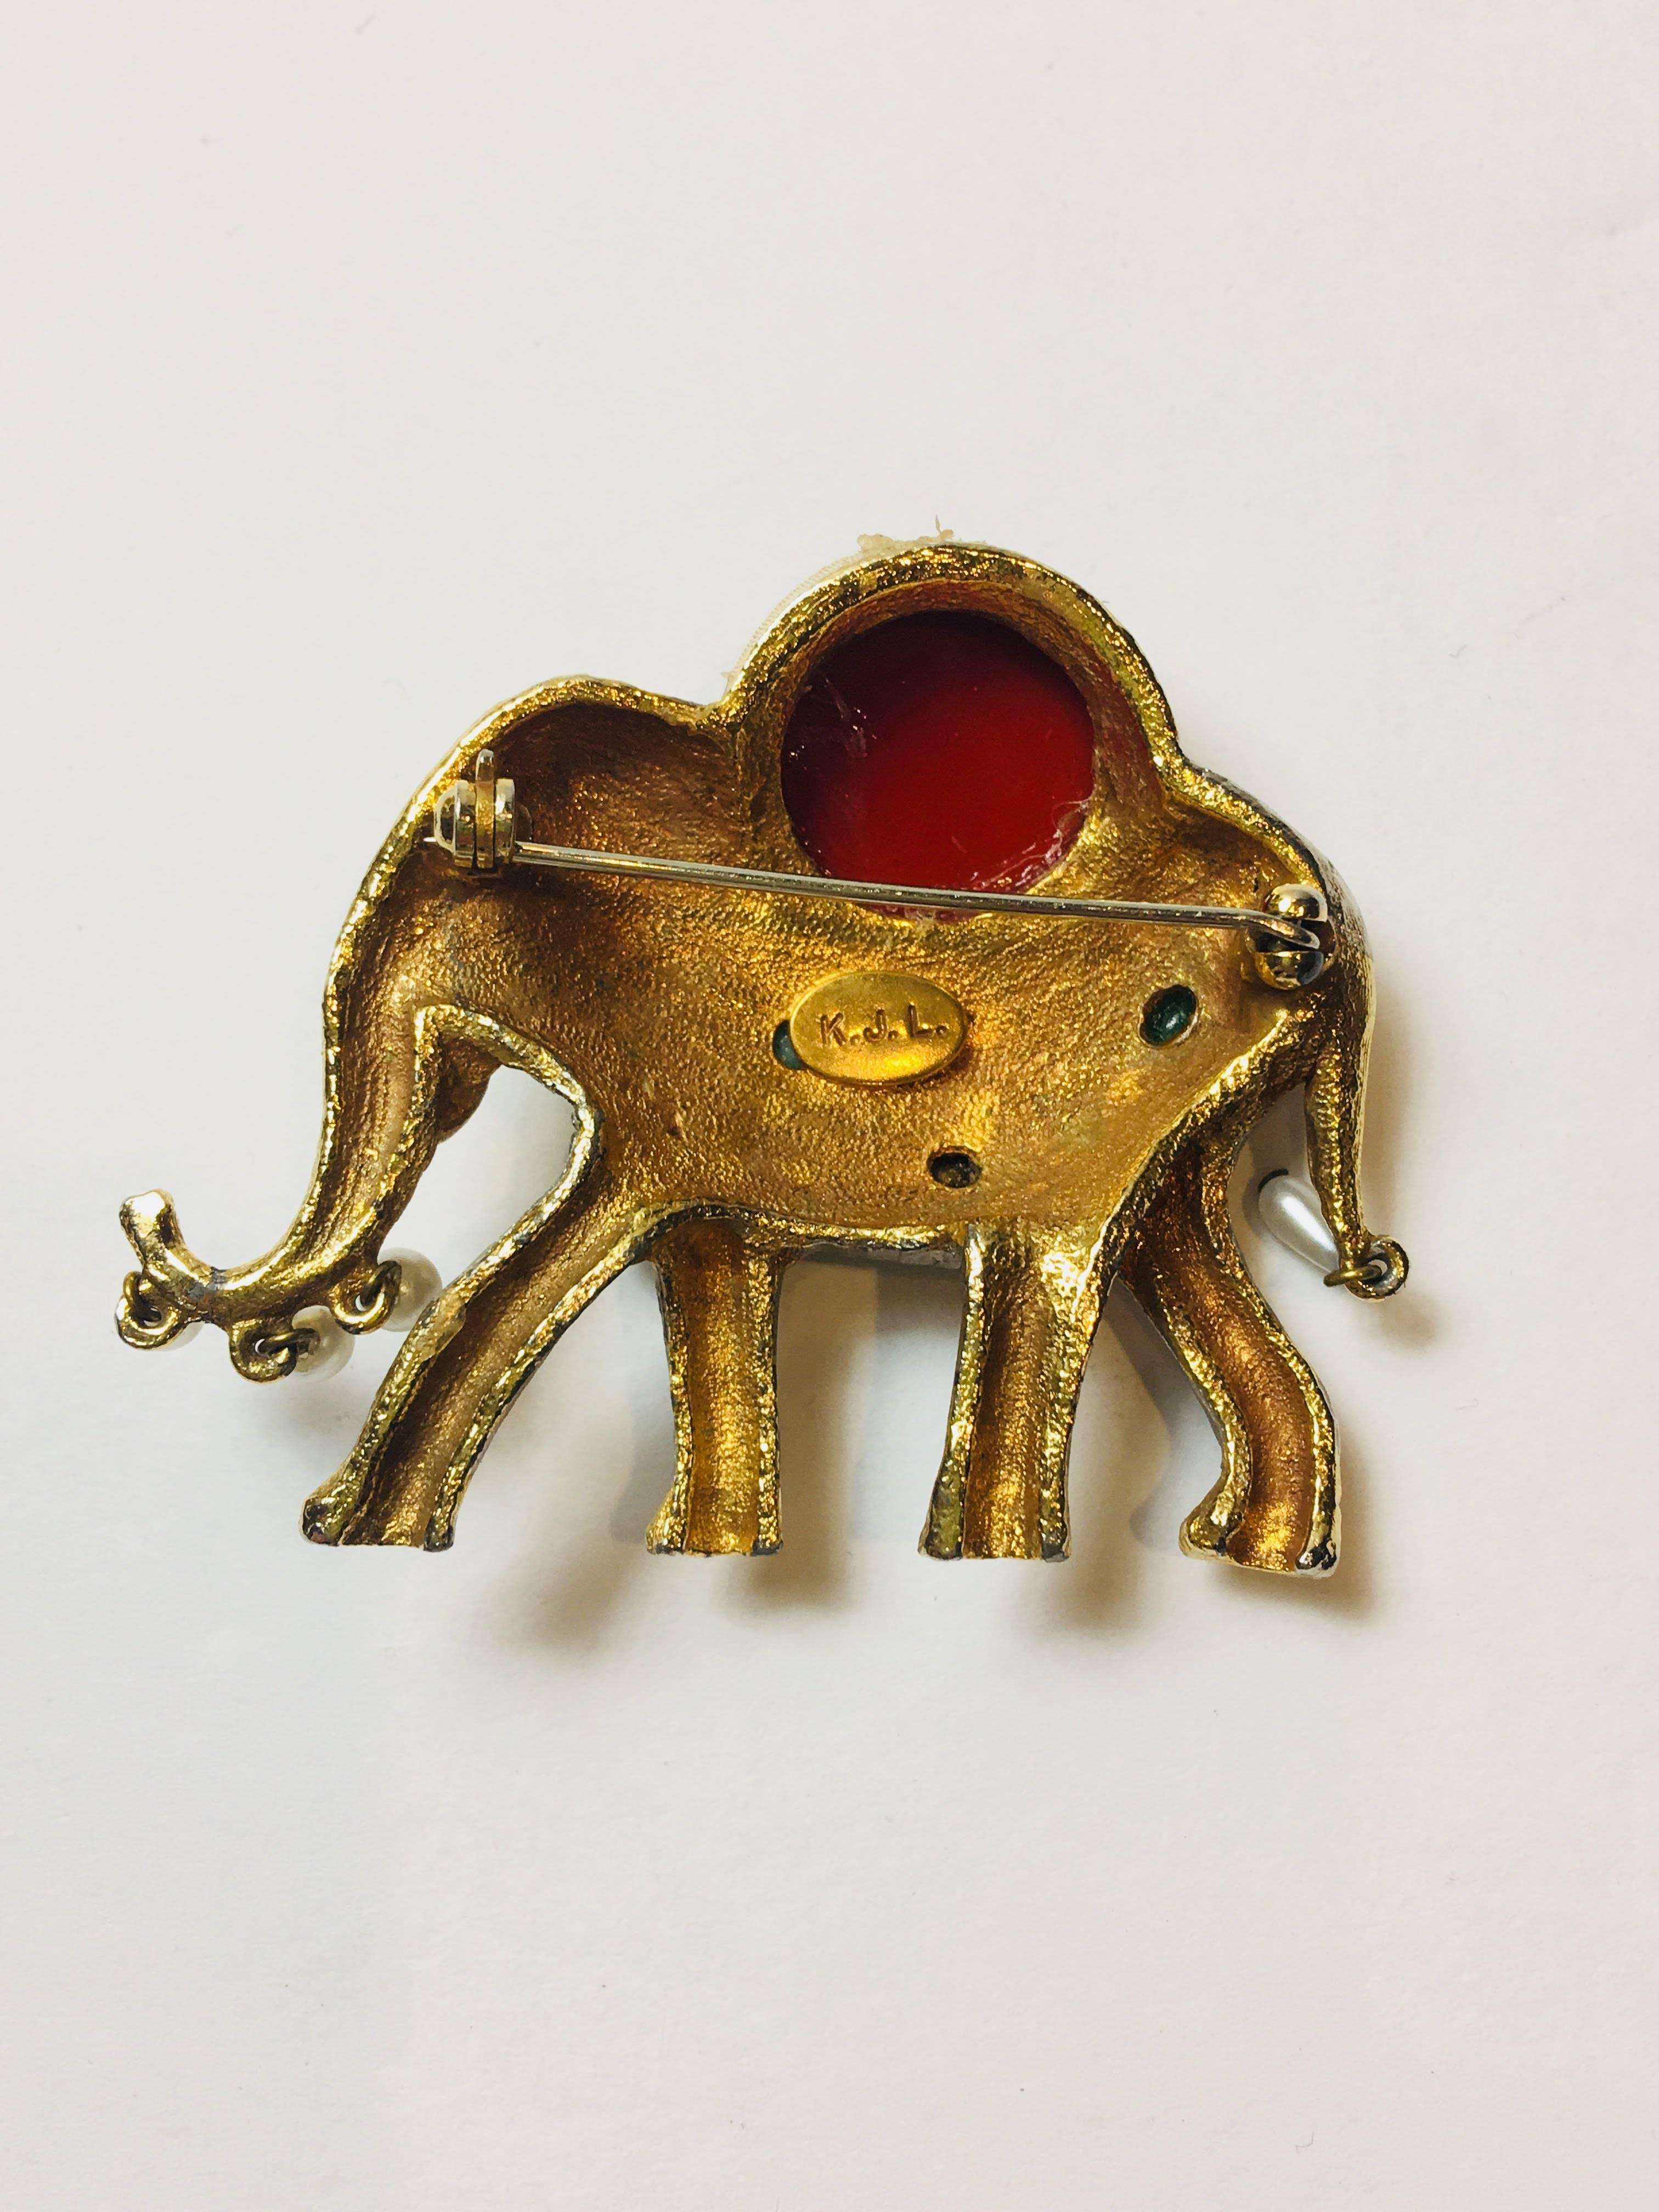 Kenneth Jay Lane Elephant Brooch with Multi Color Jewels.